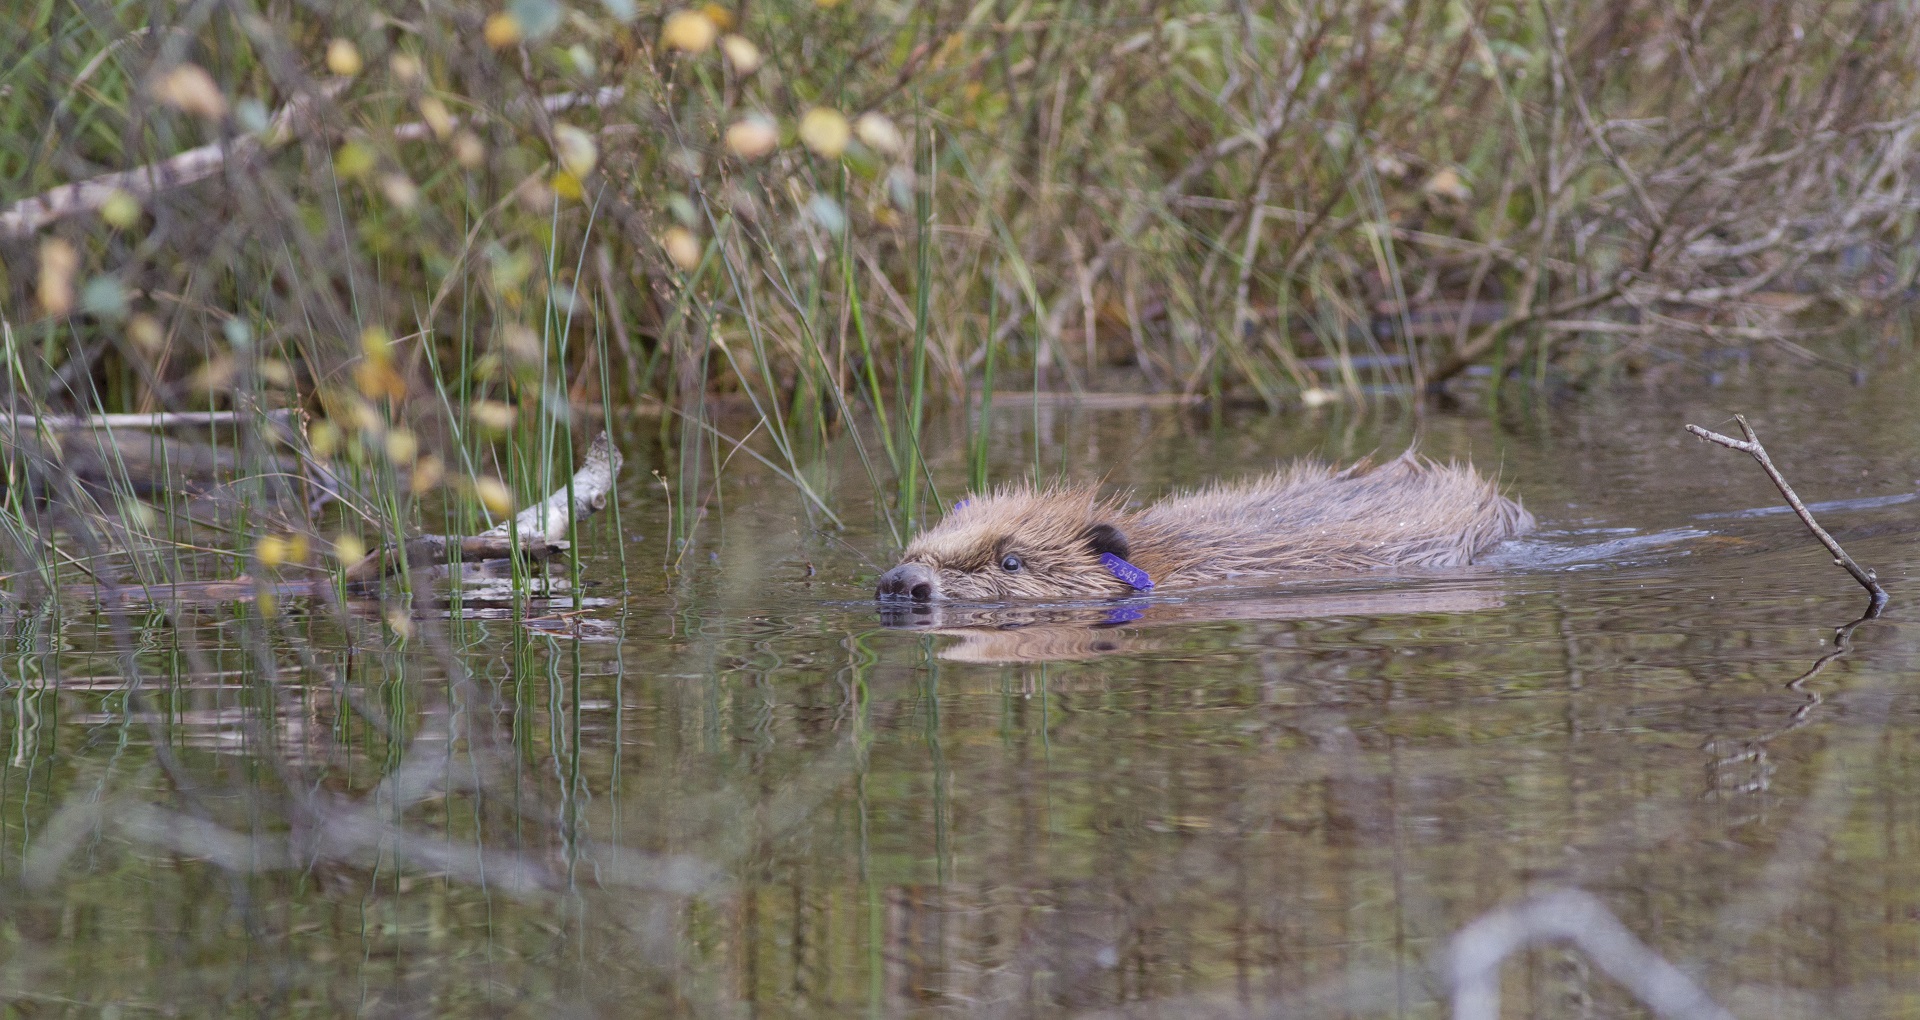 Beavers being released into wild

IMAGE: Scottish Beavers Reinforcement